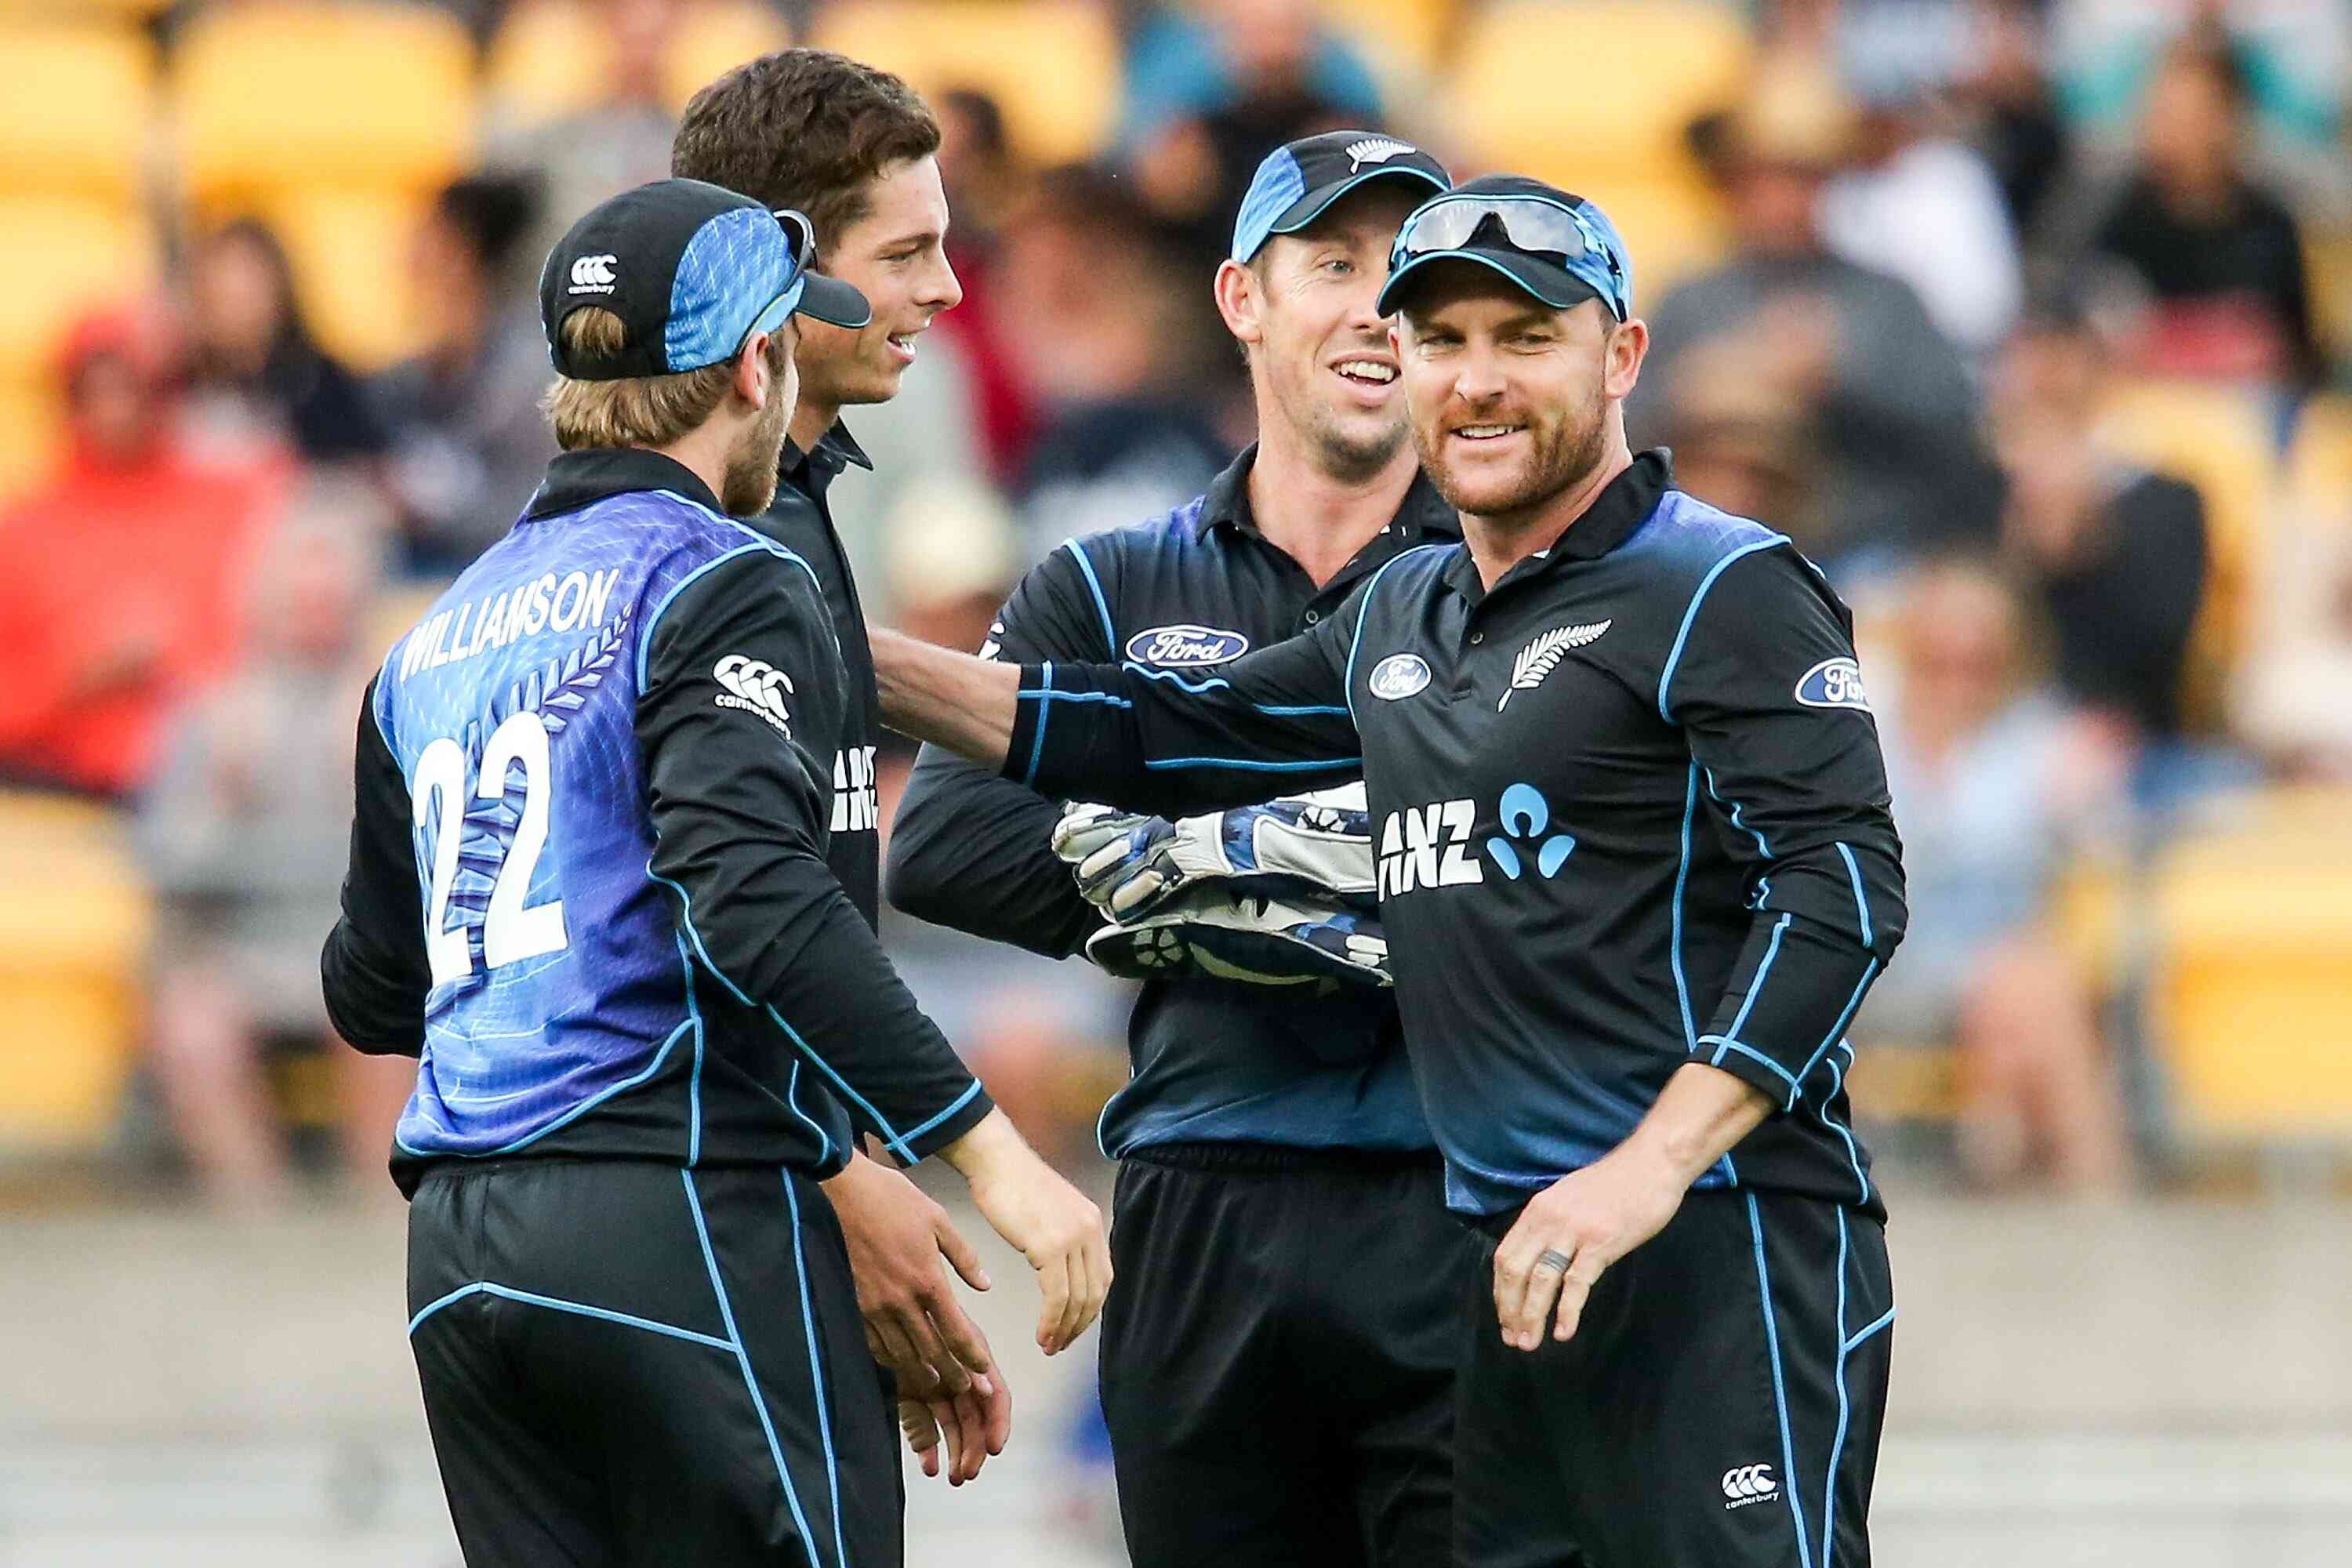 From Brendon McCullum to Martin Crowe: Here Are The Top 5 New Zealand Captains Of All Time